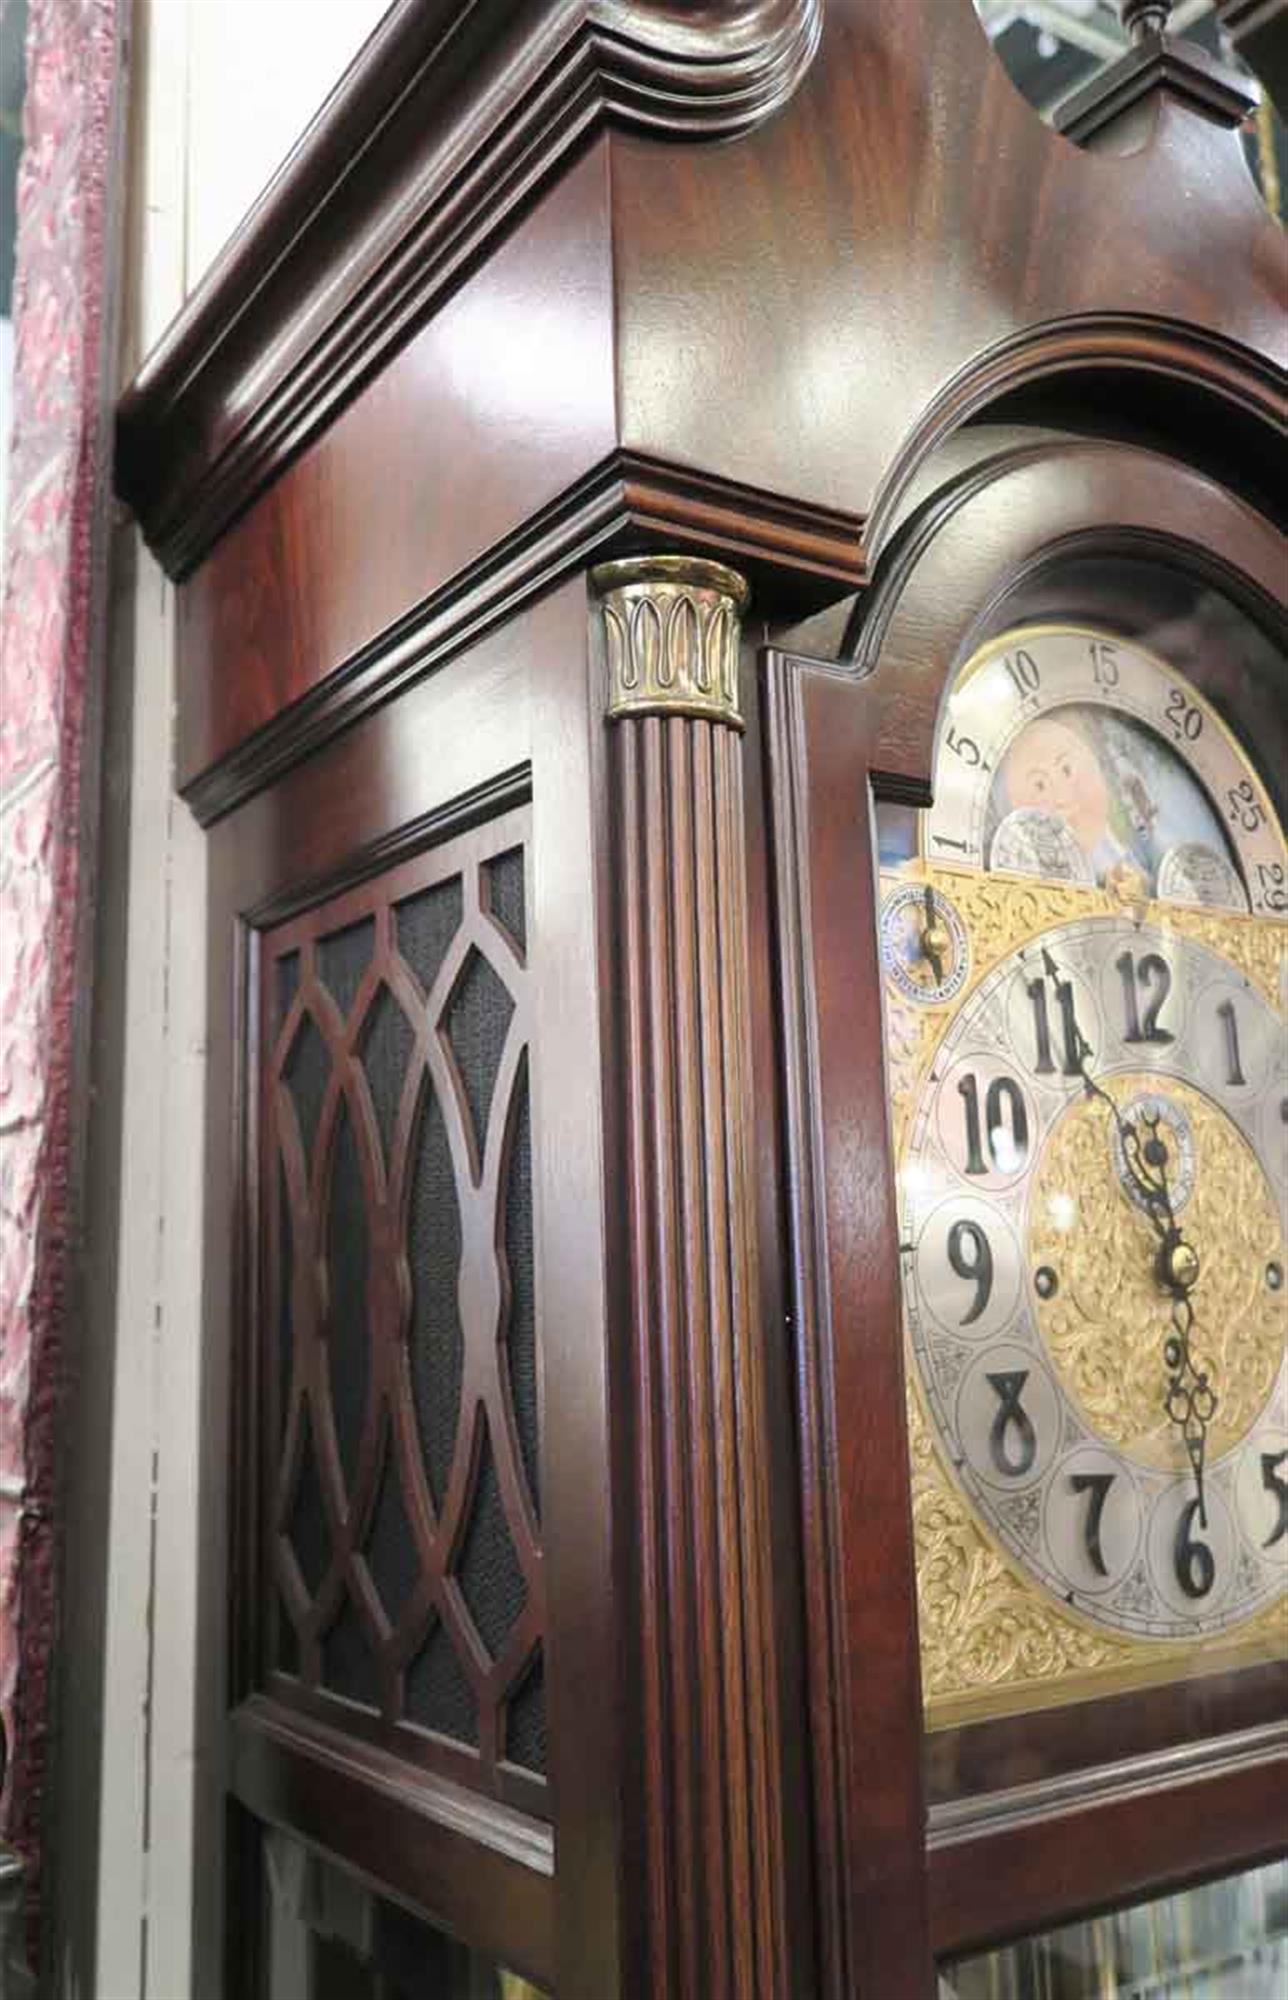 1970s Nine Tube Mahogany Herschede Grandfather Clock with Brass Accents In Good Condition For Sale In New York, NY